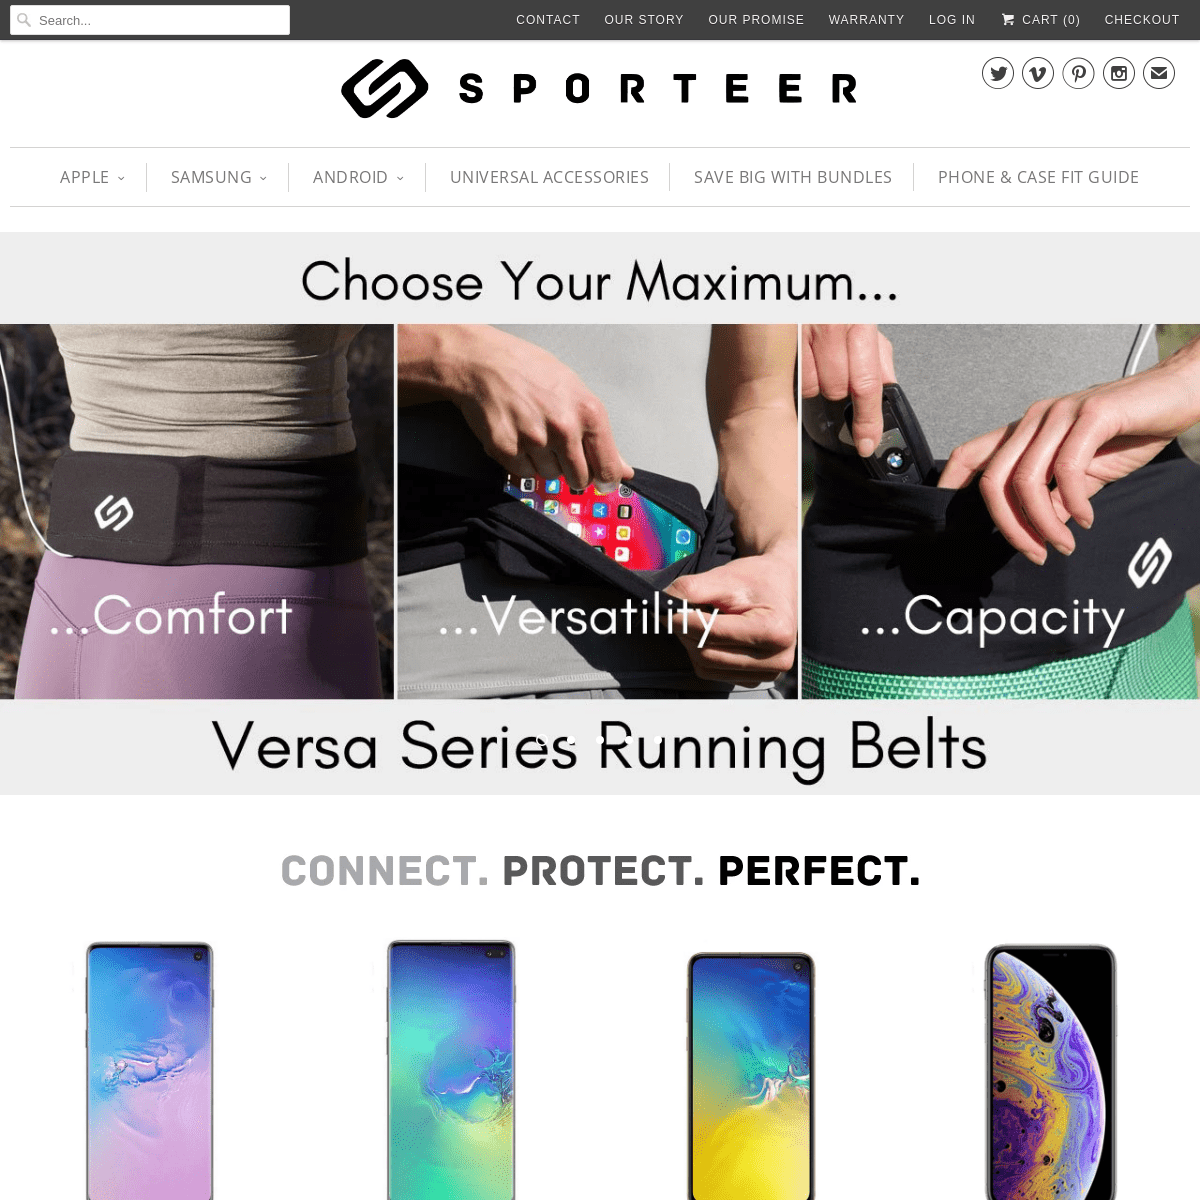 Sporteer Armbands, Belts and Running Cases for iPhone, Galaxy, Android